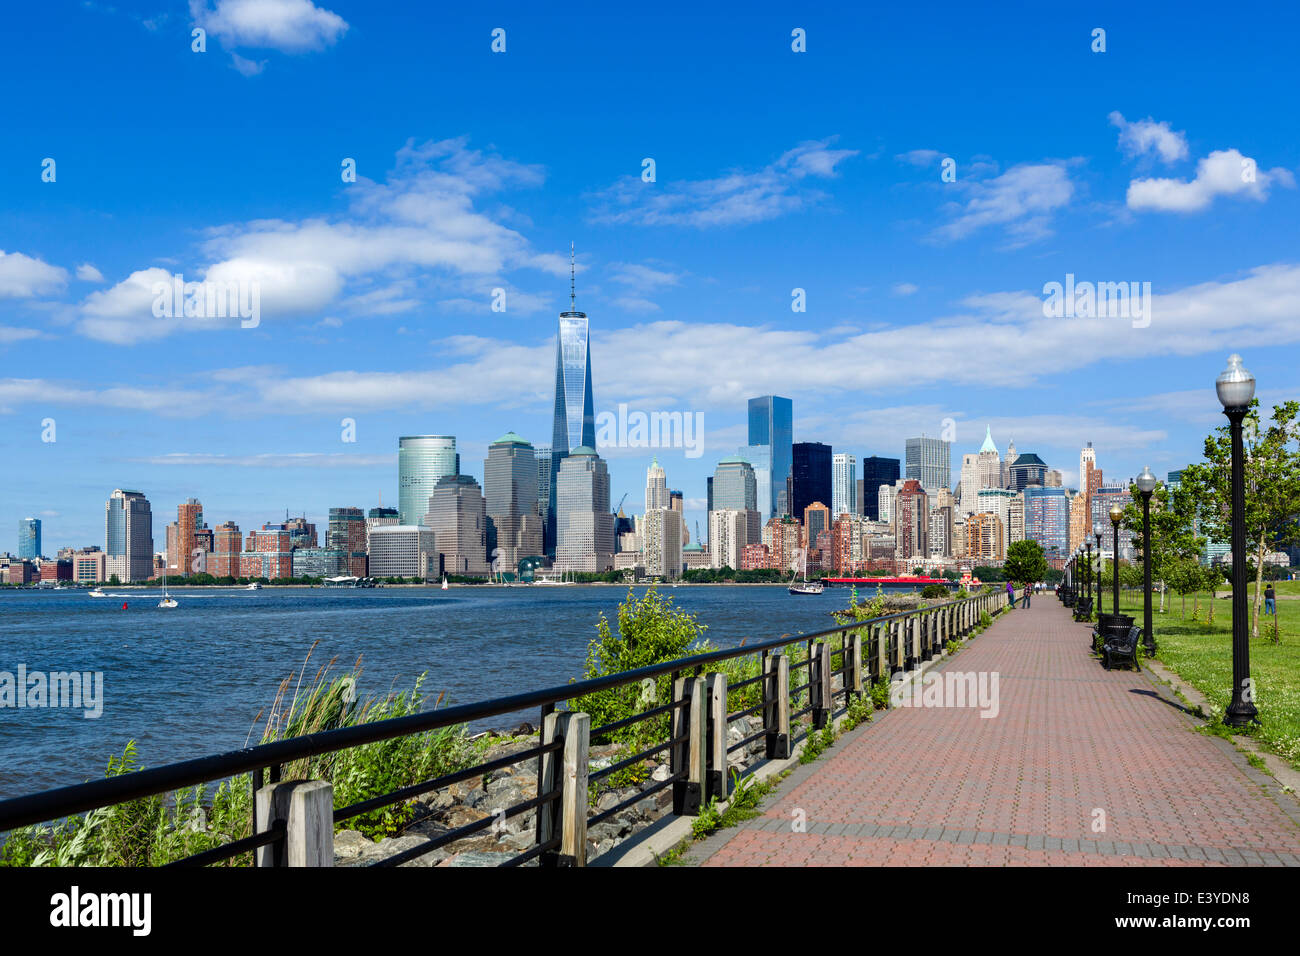 The Lower Manhattan skyline in downtown New York City viewed across the Hudson River from Liberty State Park in New Jersey, USA Stock Photo